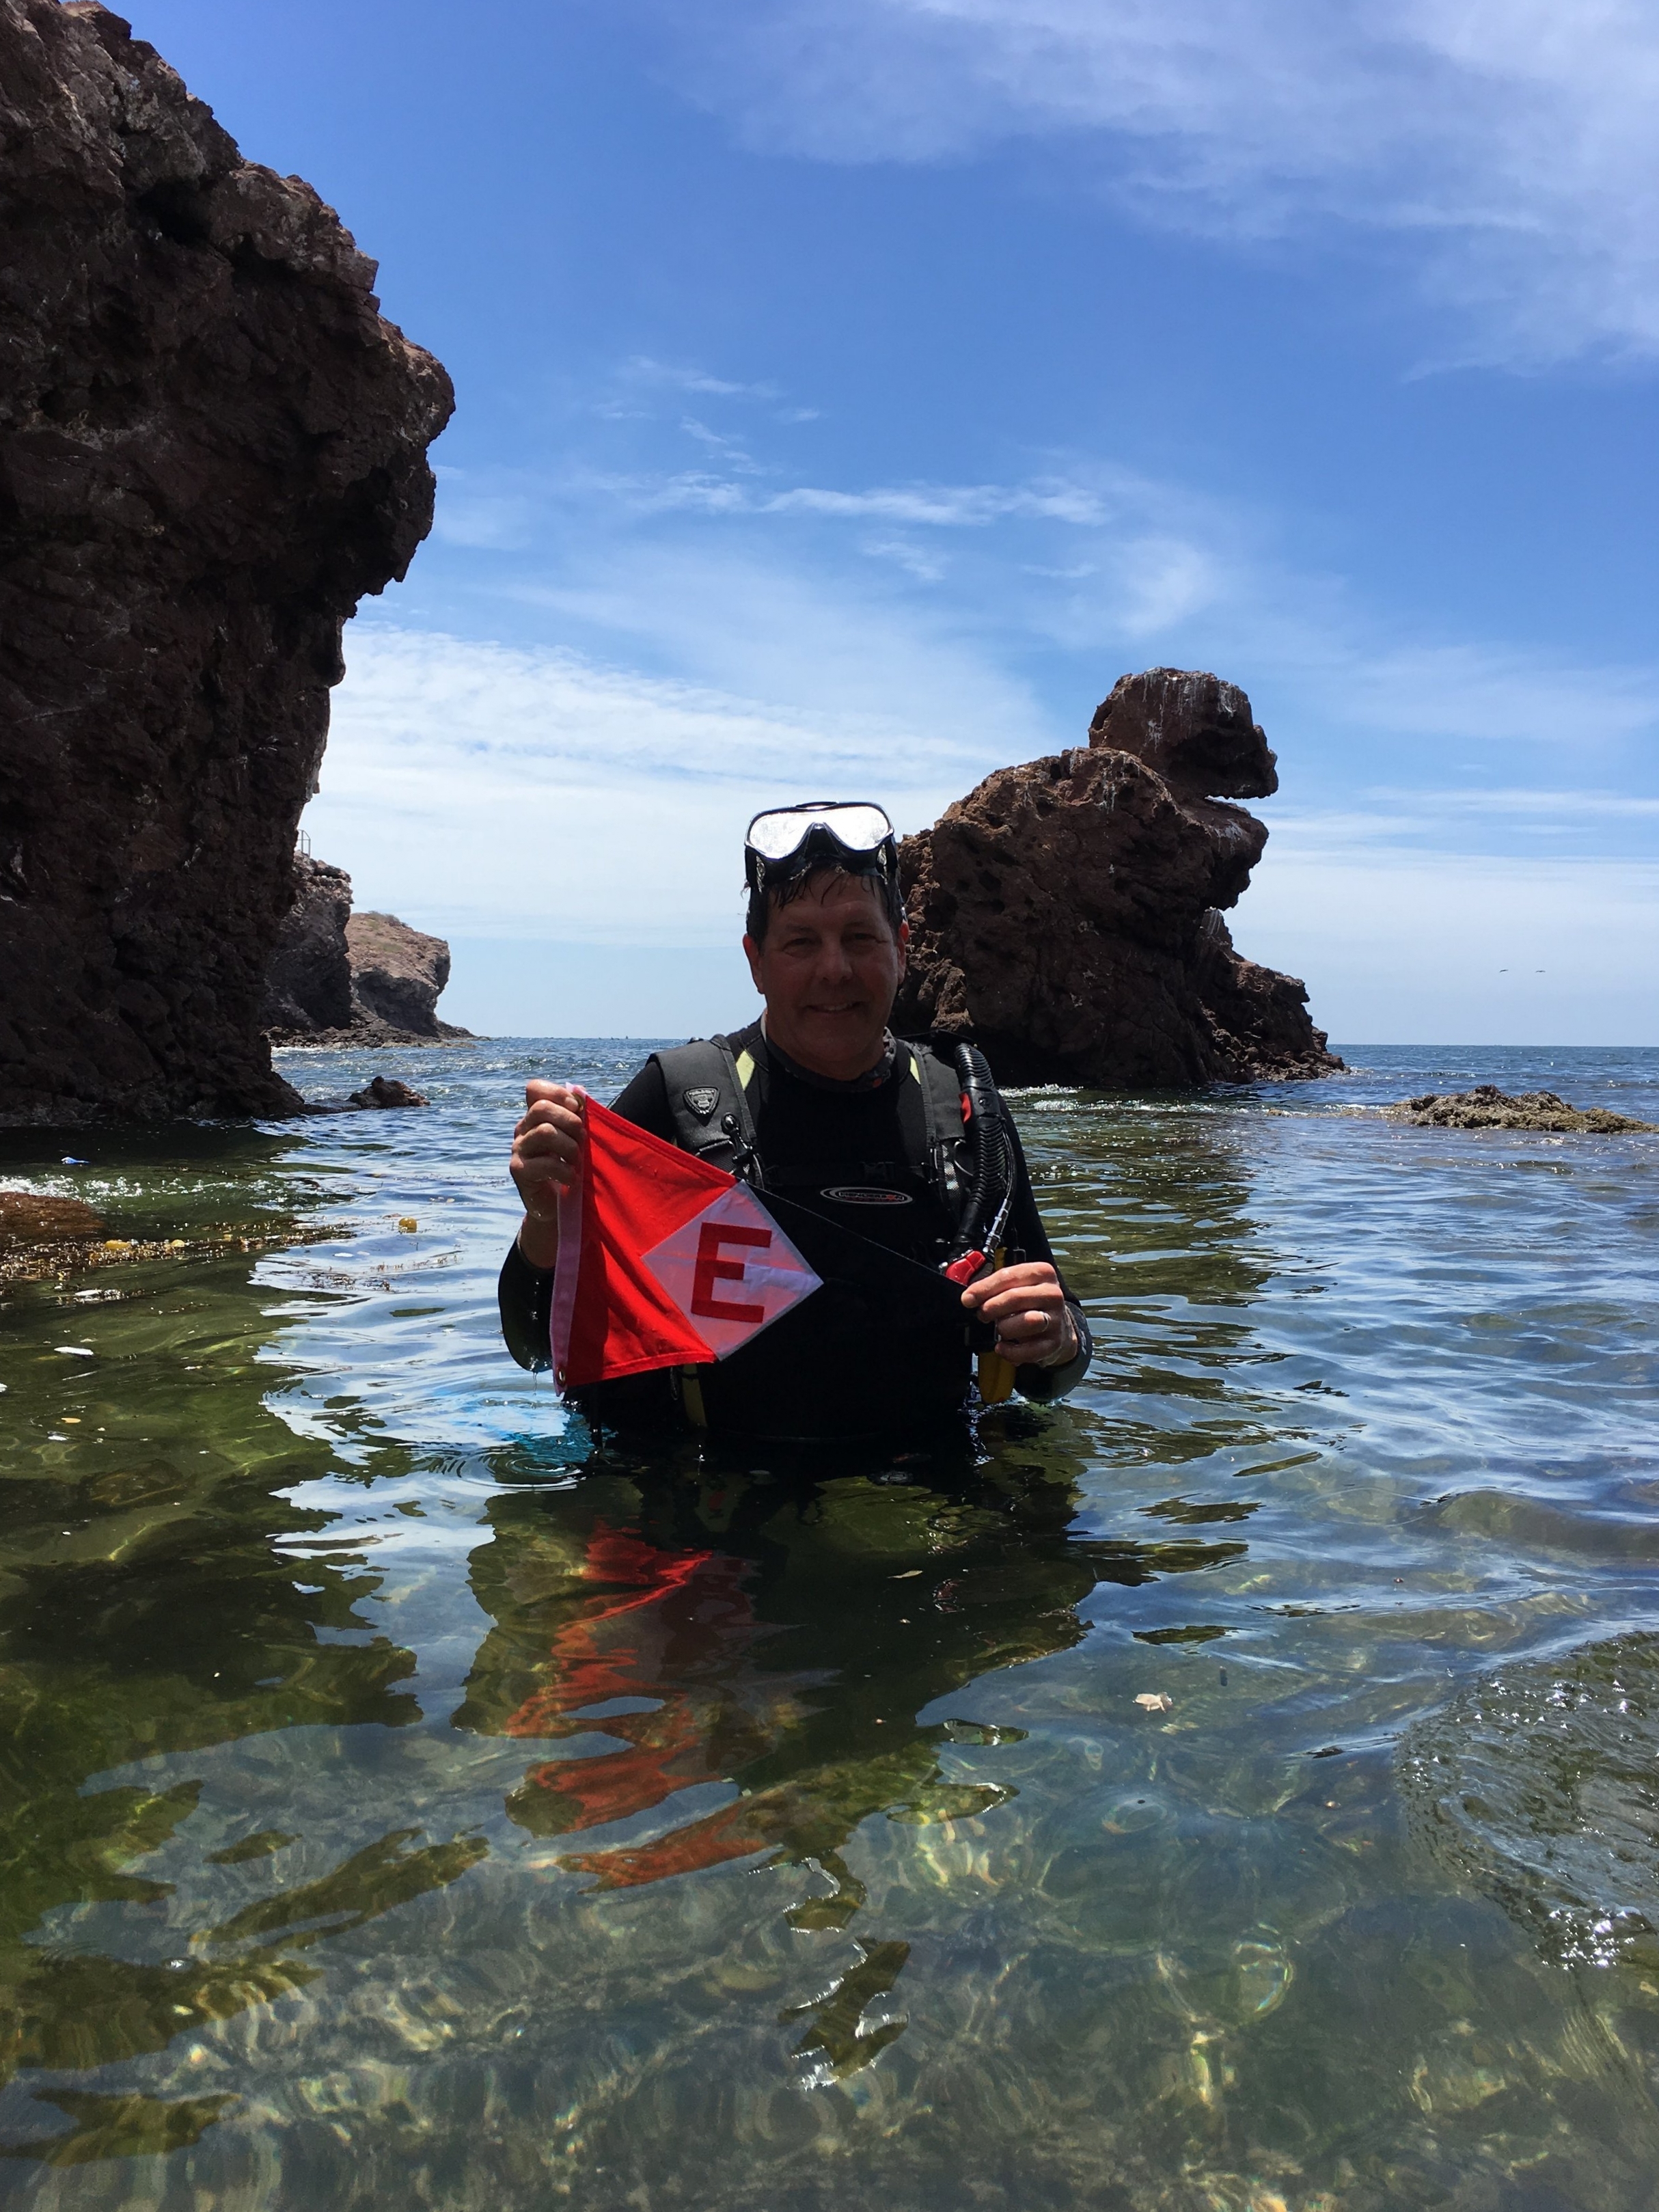  On a diving trip to the Sea of Cortez, Rob takes a moment to show his EYC pride. 